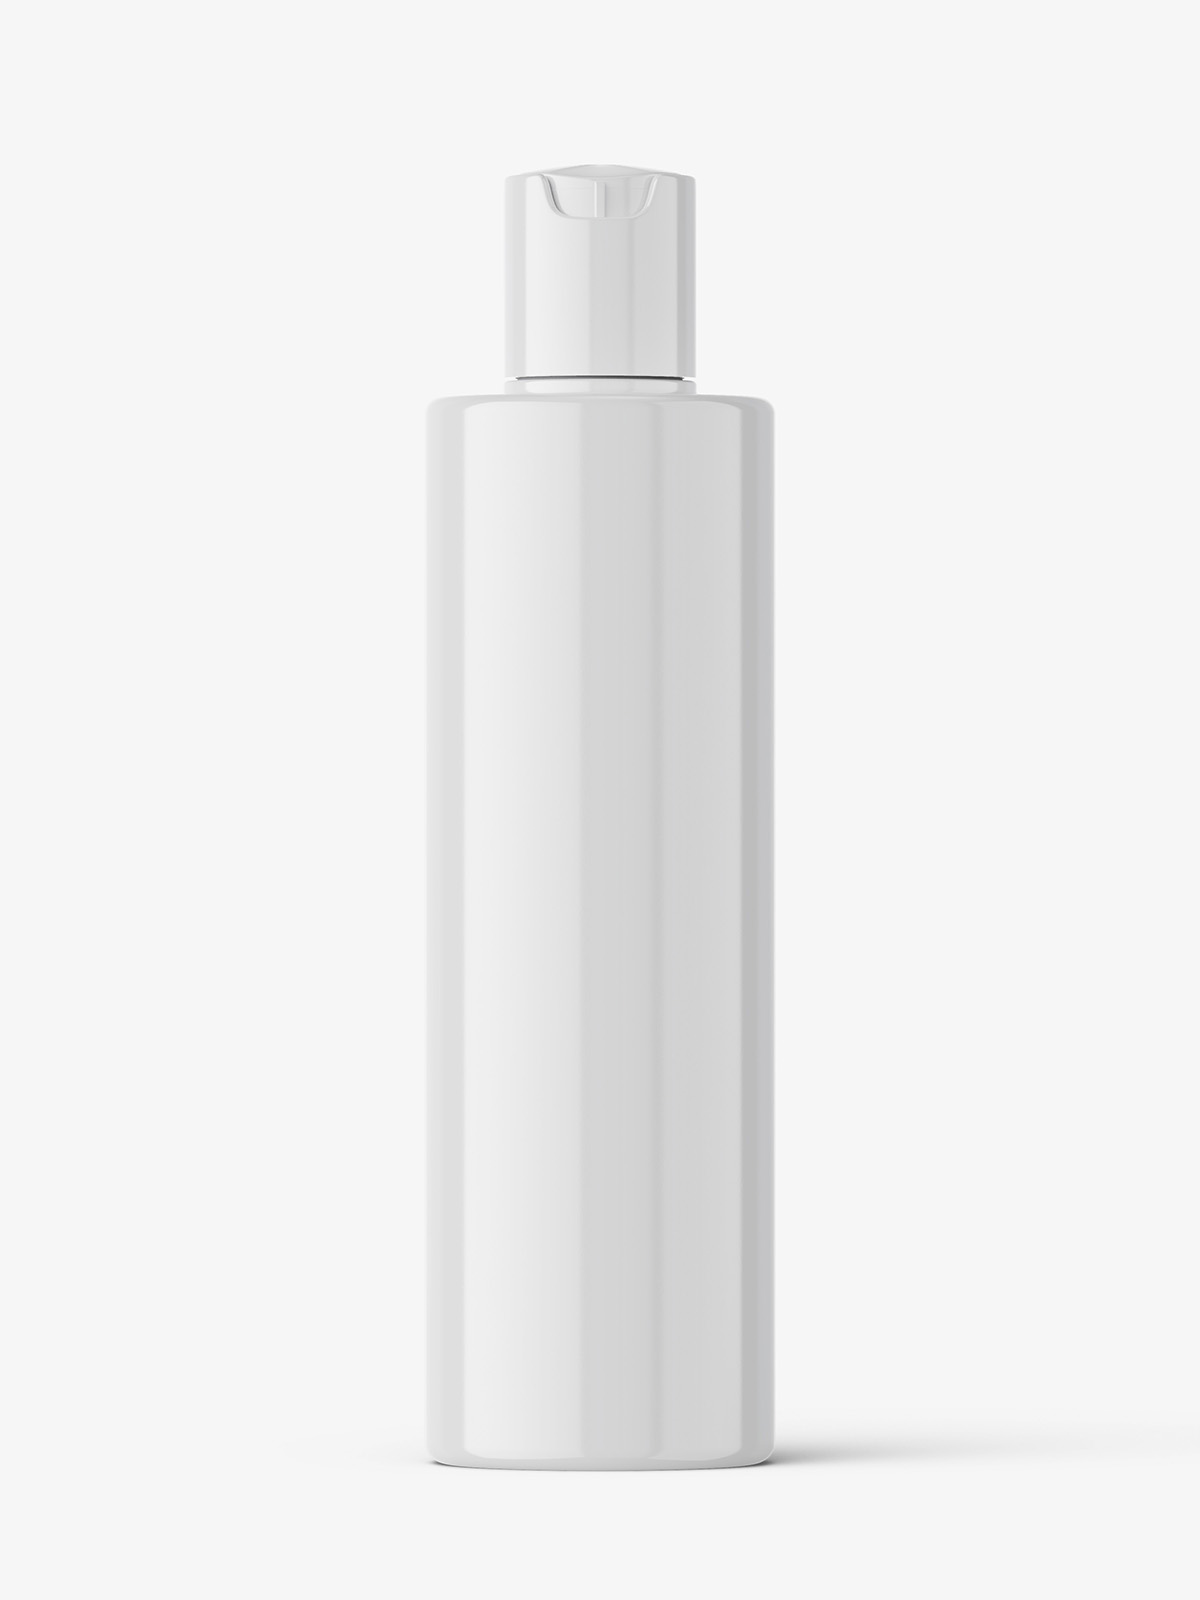 Download Cylinder bottle with disctop mockup / glossy - Smarty Mockups